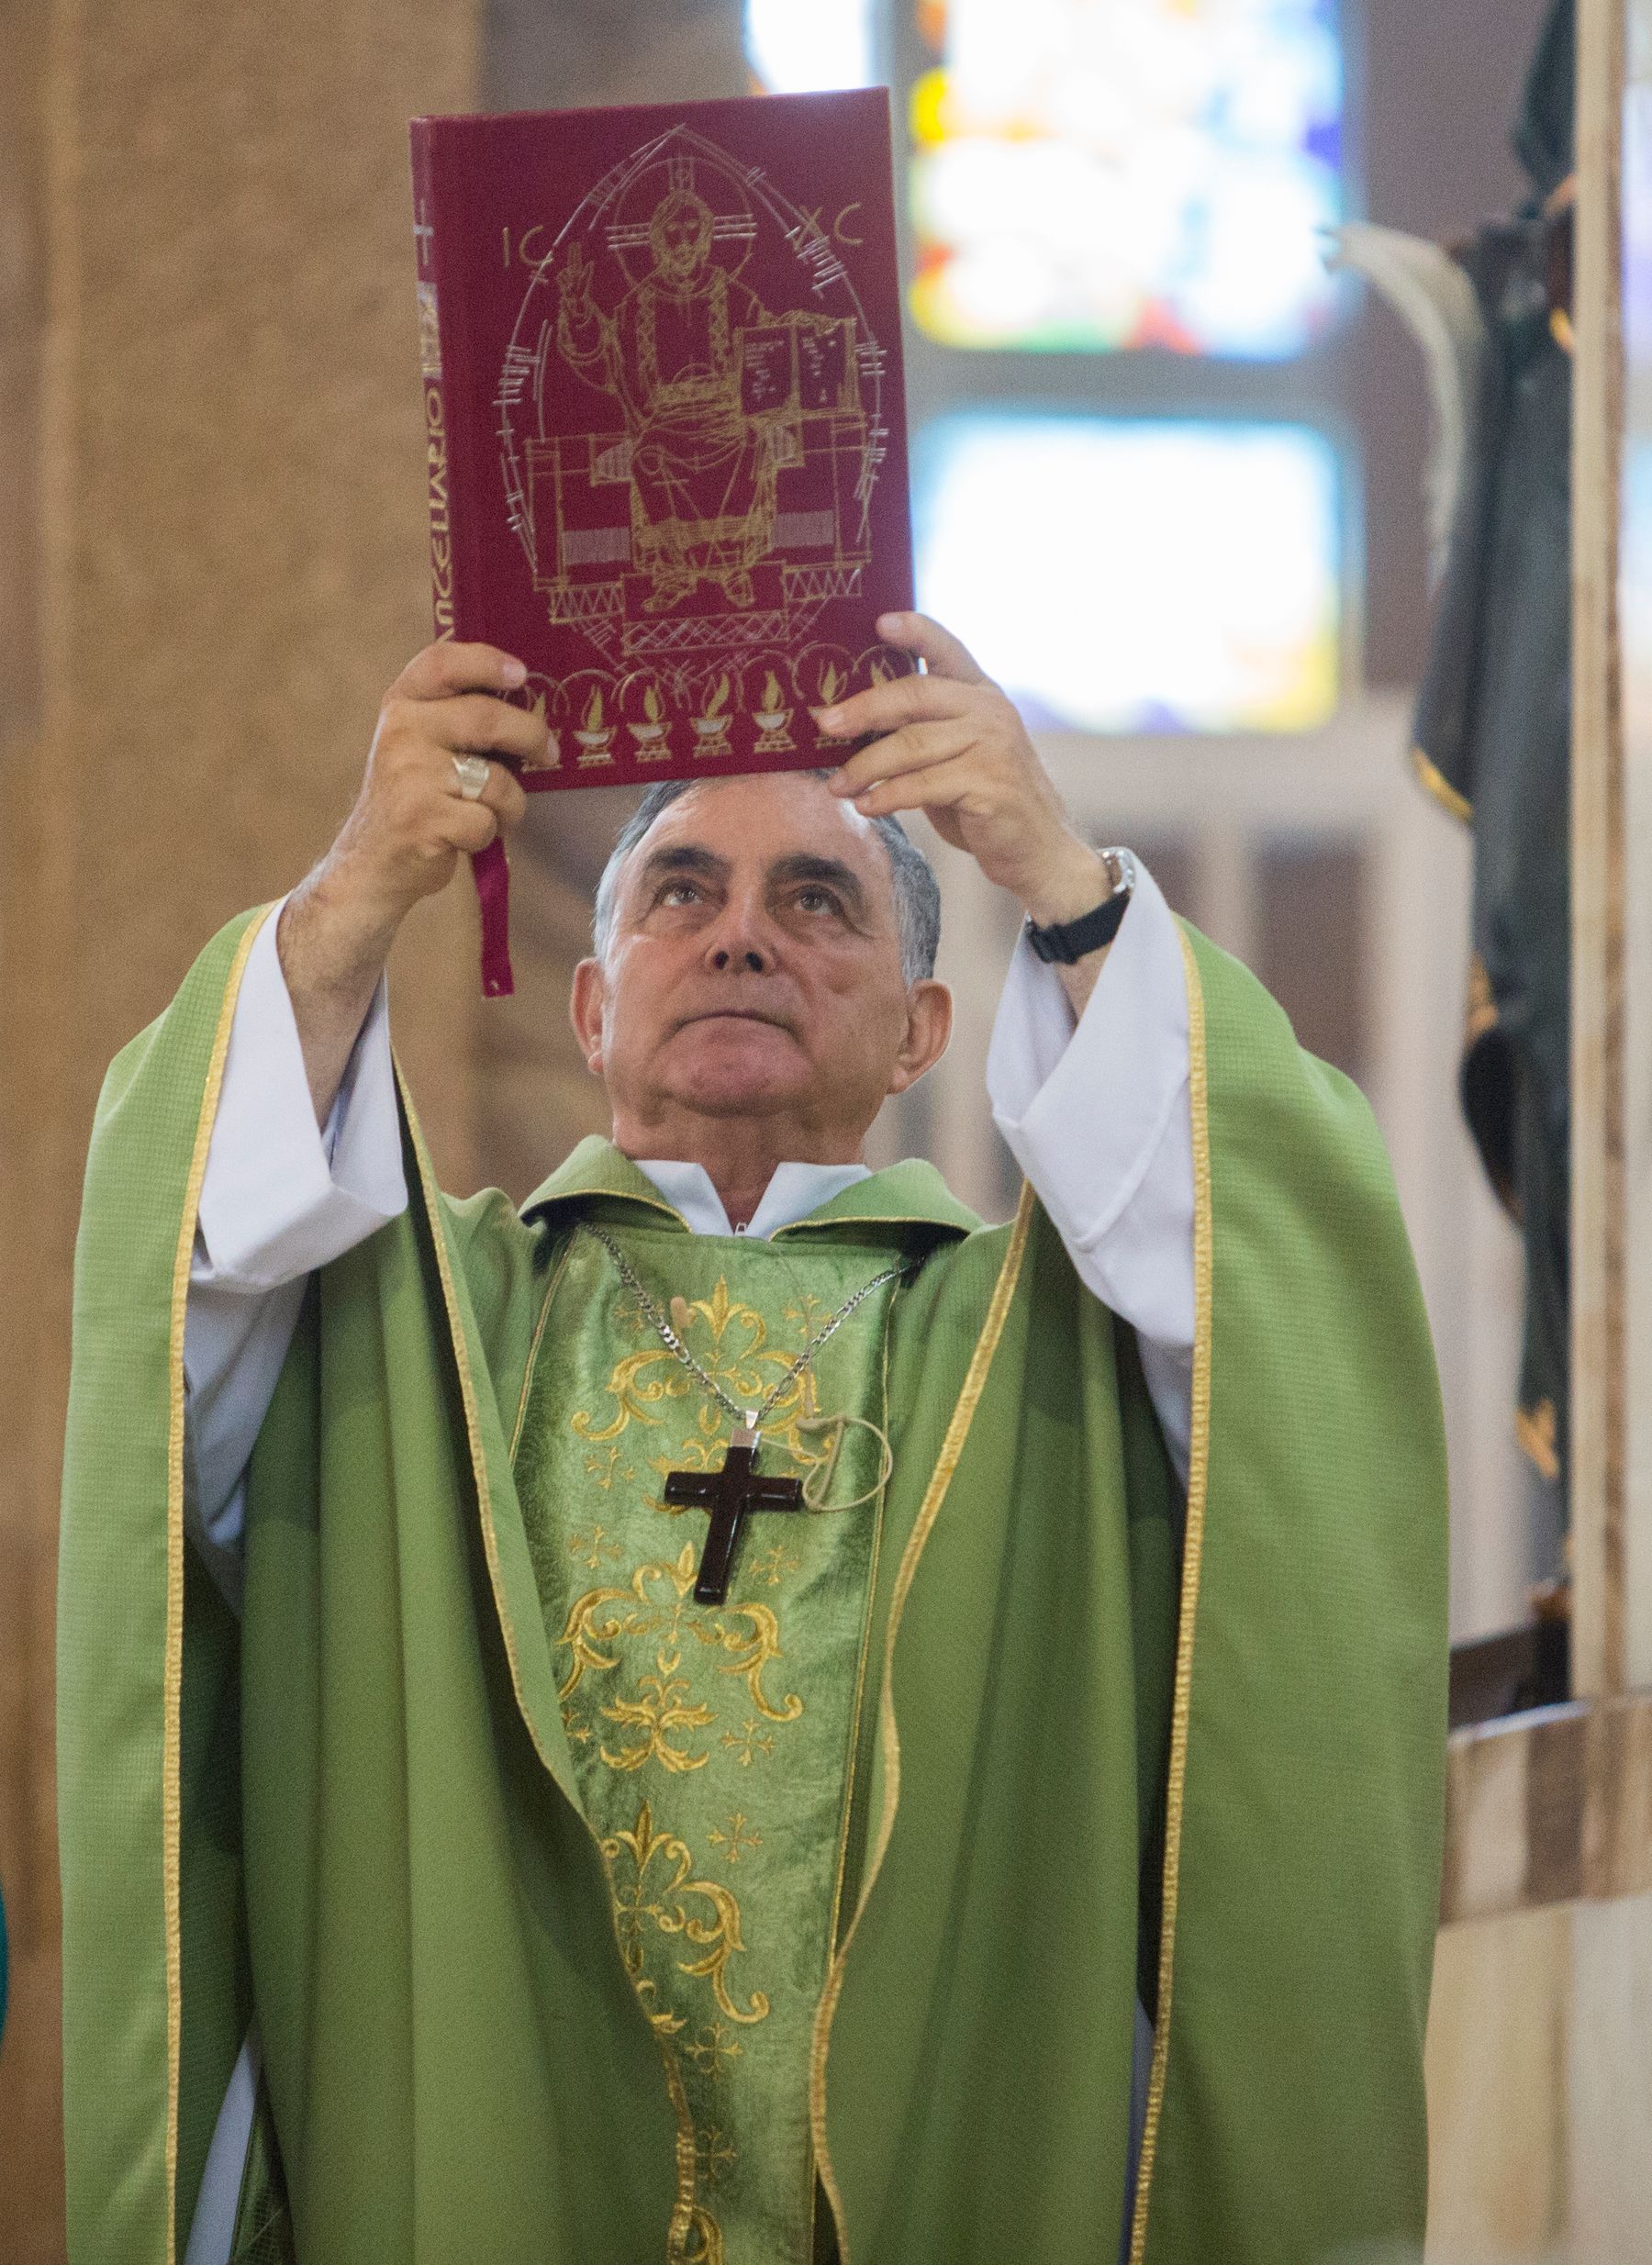 Bishop Salvador Rangel Mendoza, serving Chilapa and Chilpancingo, has mediated criminal groups' negotiations and helped the release of kidnapping victims. Image by Omar Ornelas/The Desert Sun. Mexico, 2019.